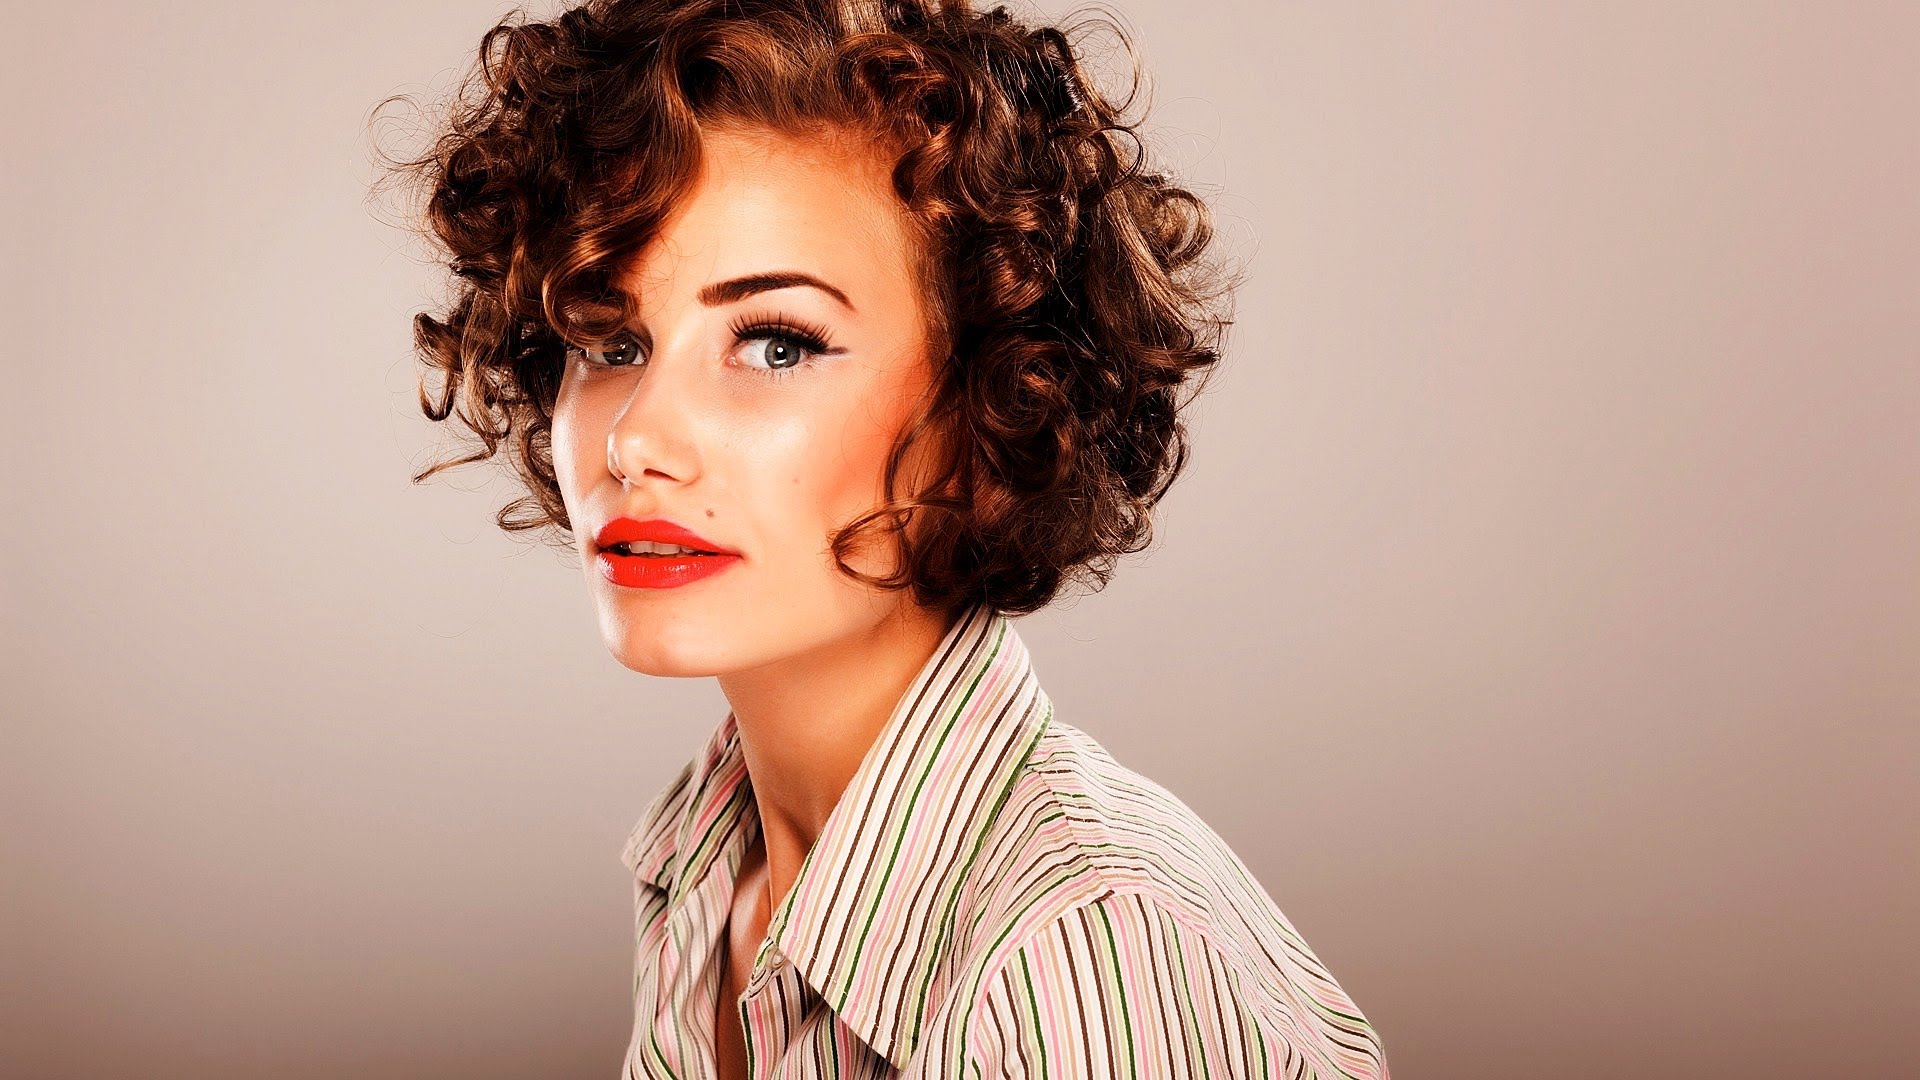 Stunning hairstyles for short curly hair